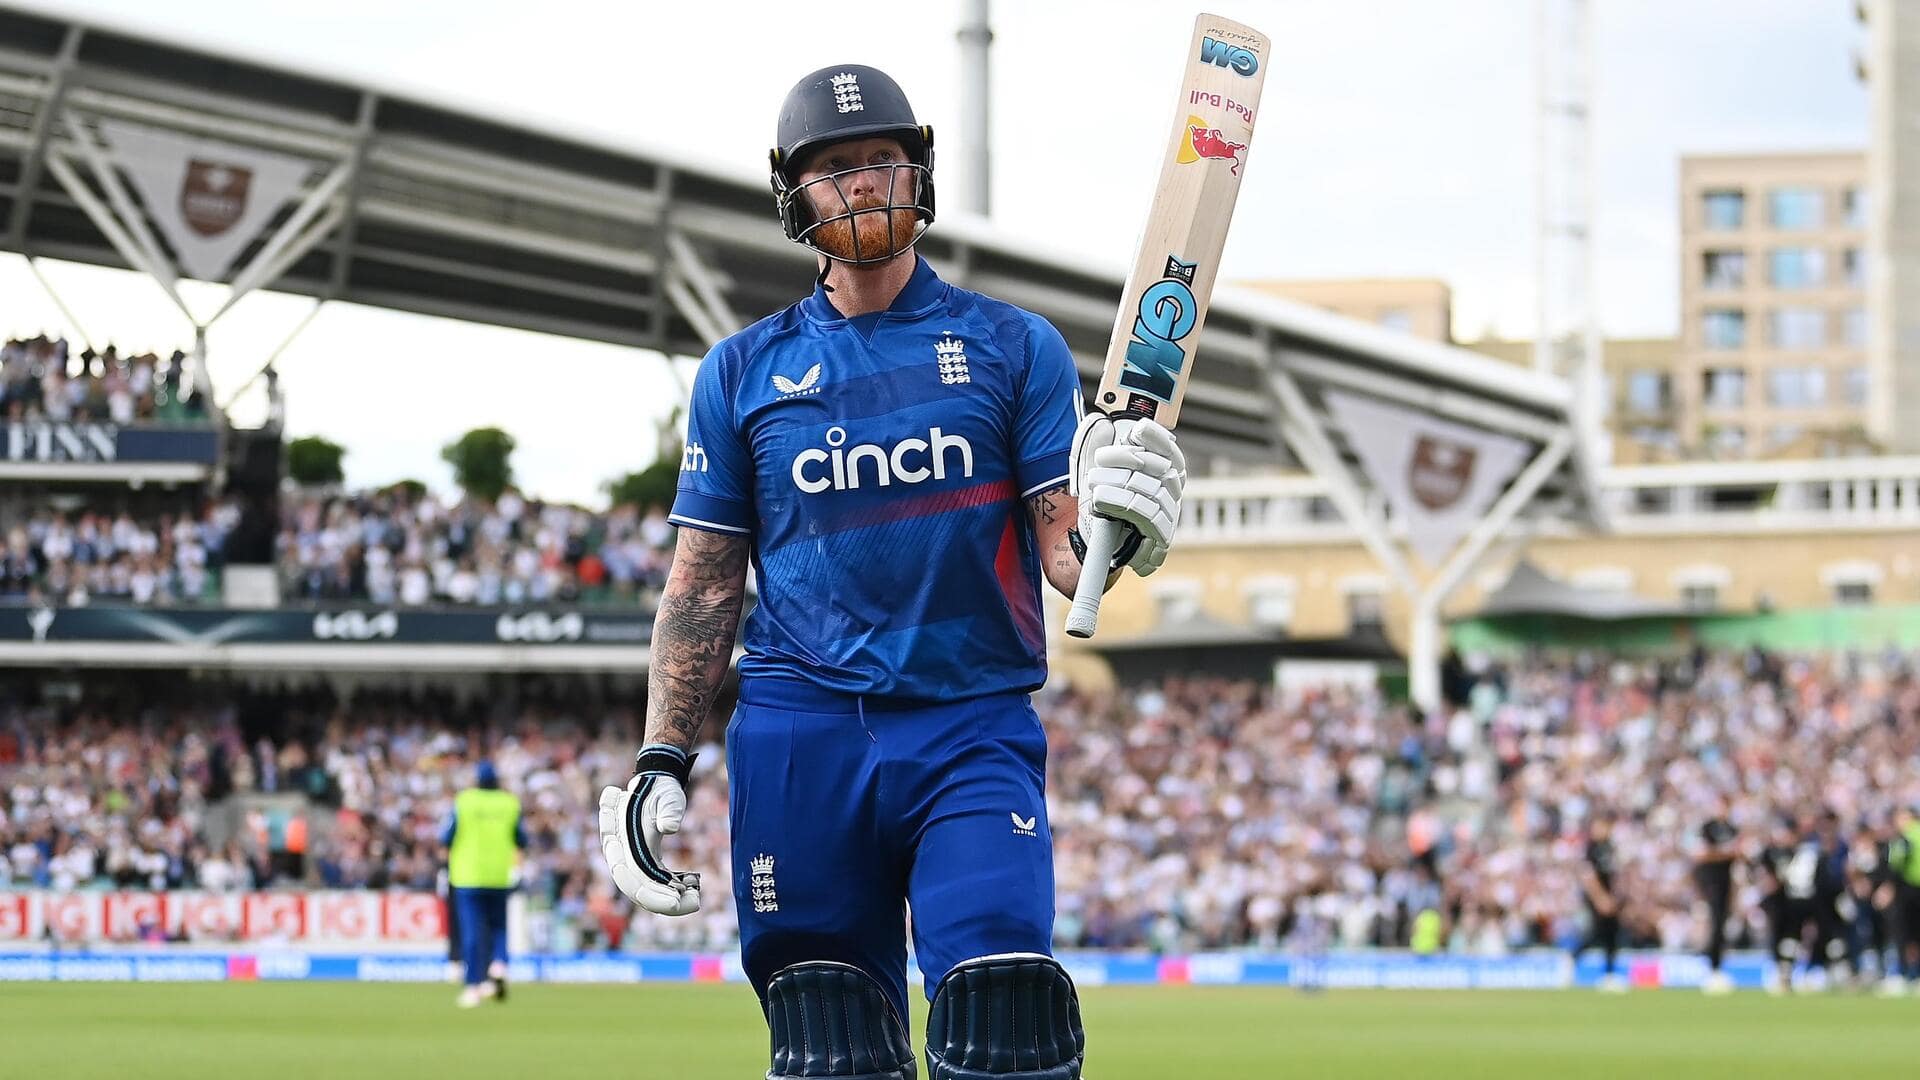 Ben Stokes registers the highest individual ODI score for England